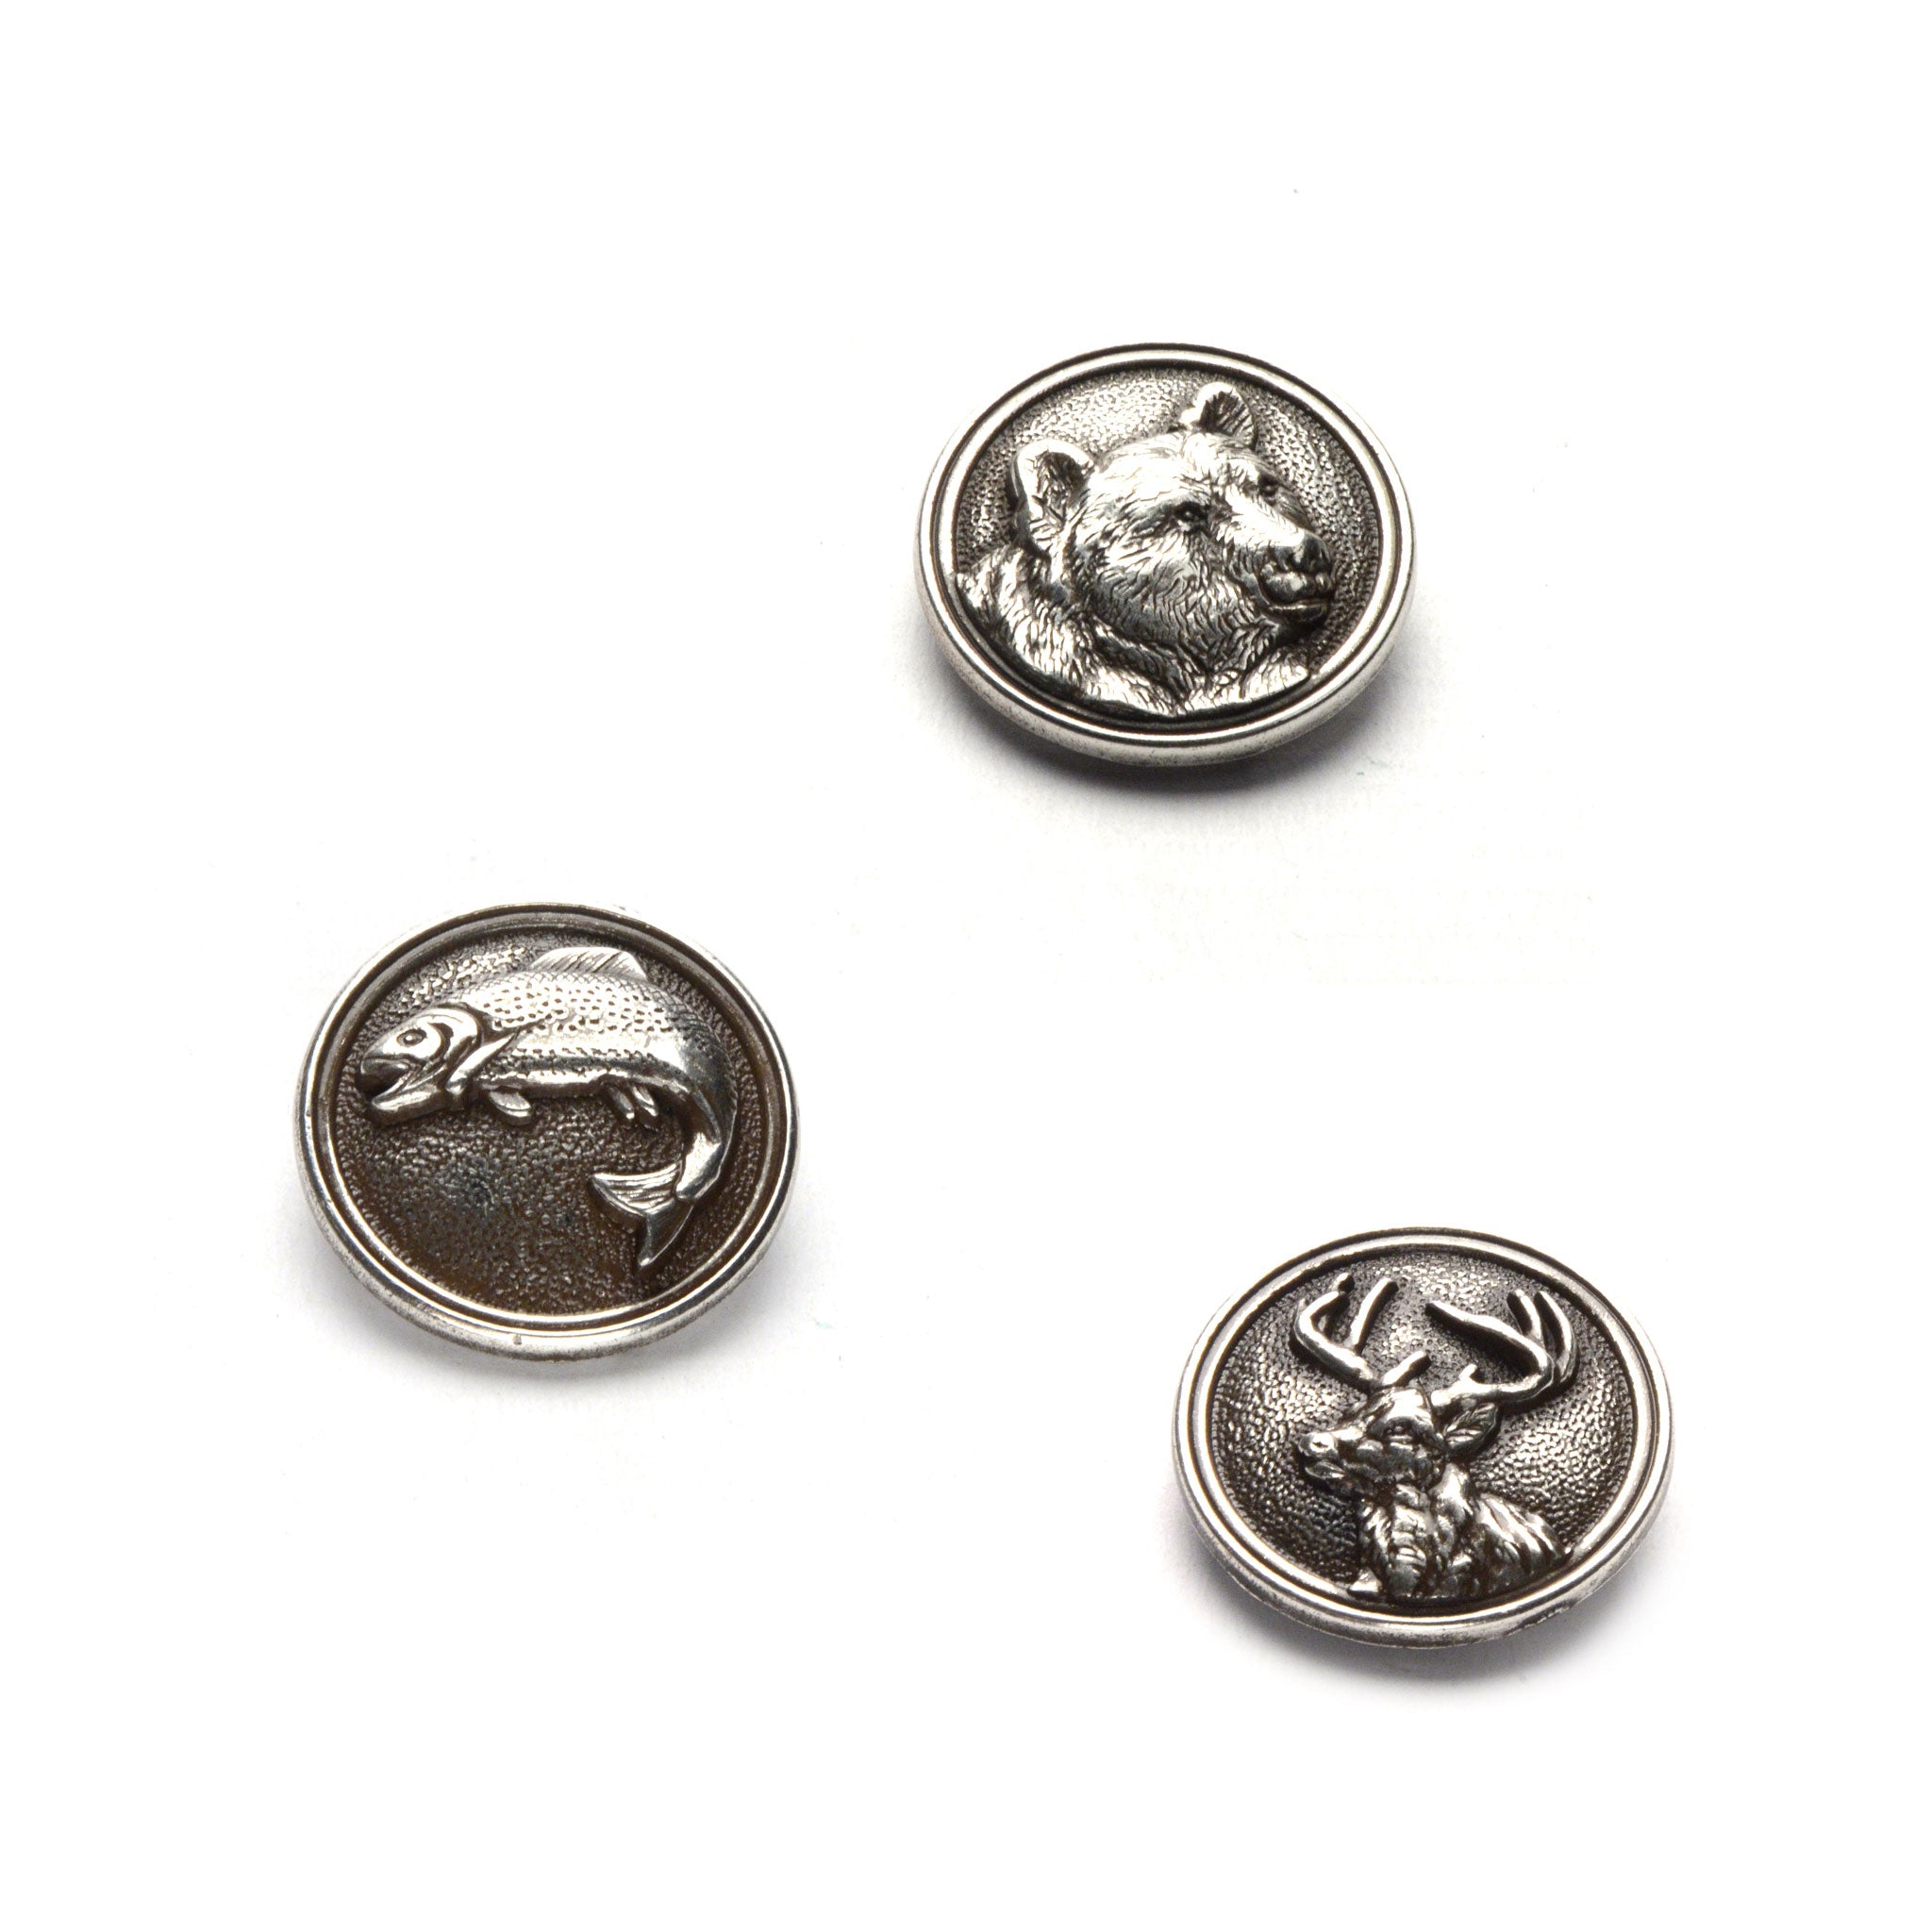 Wildlife Antique Silver Conchos from Identity Leathercraft